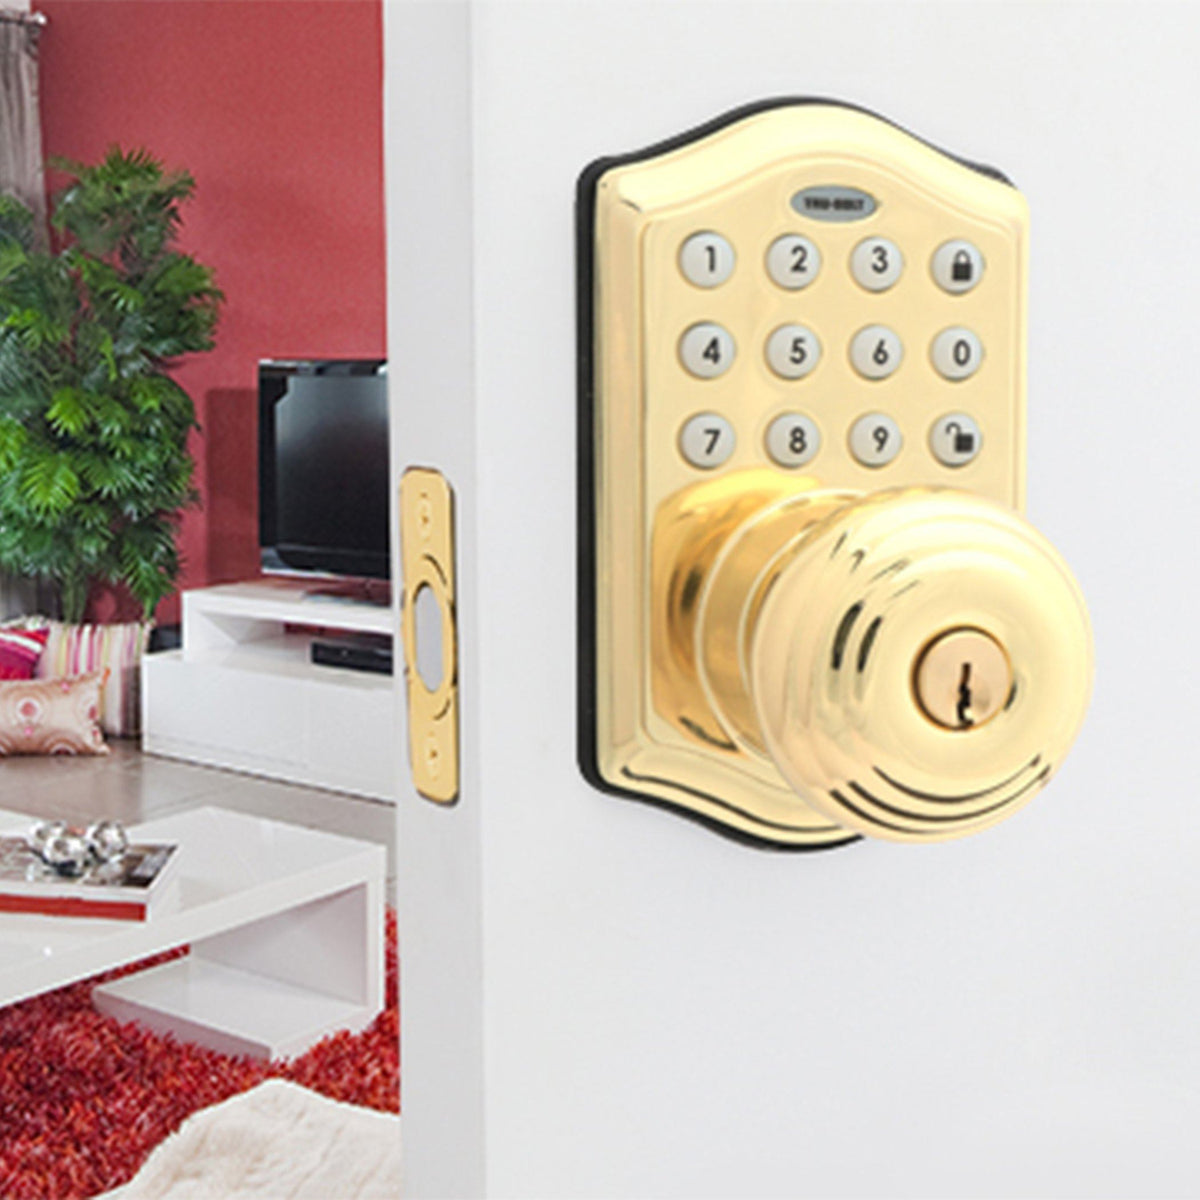 Honeywell 8732001 Electronic Entry Knob Door Lock with Keypad in Polished Brass Installed on Door